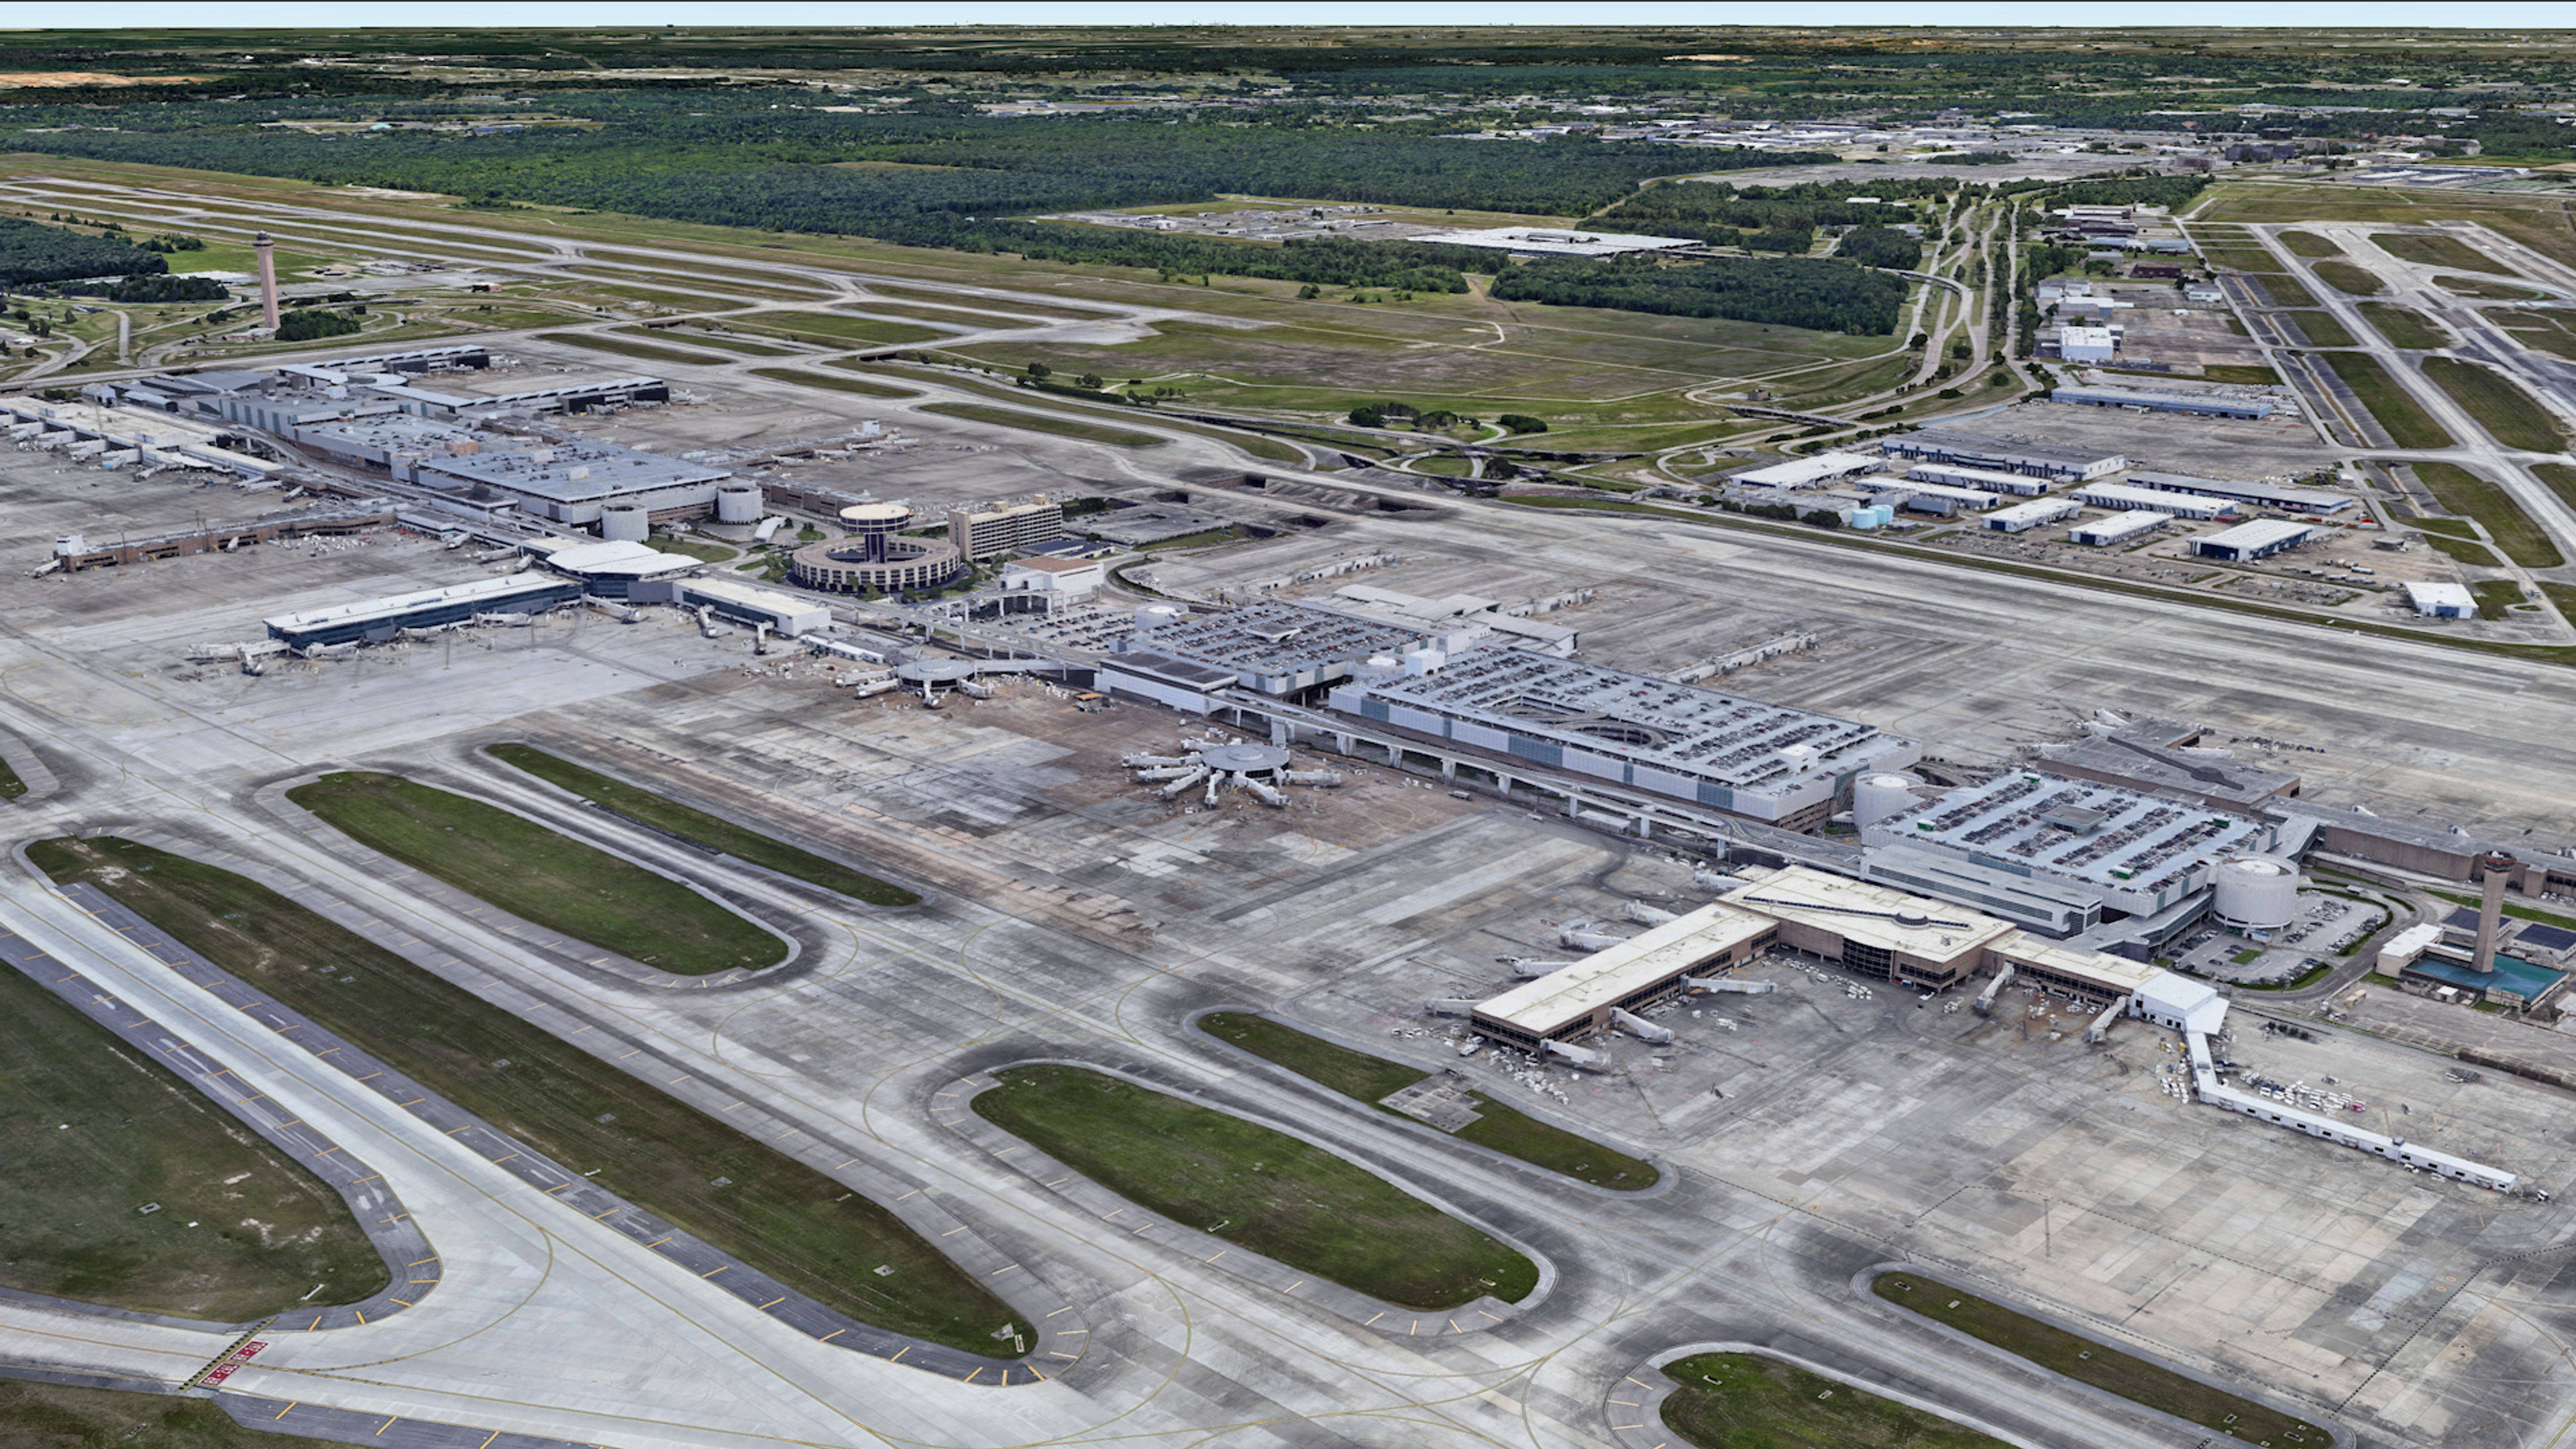 Aerial View of Houston Intercontinental Airport